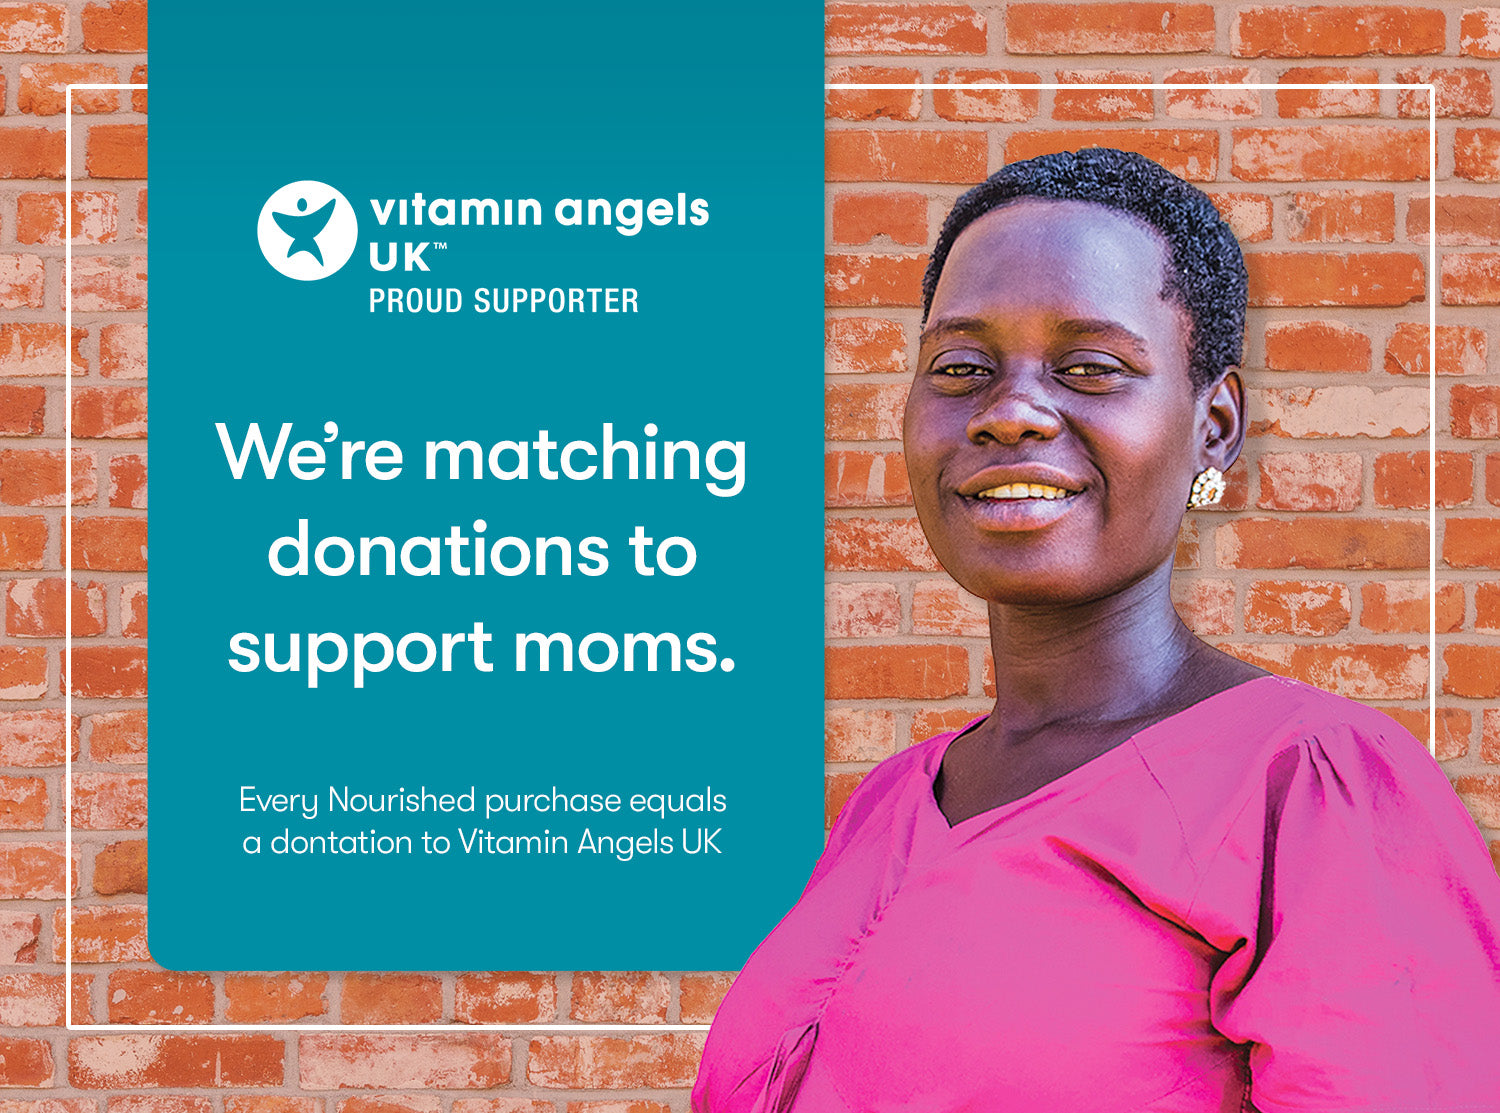 Vitamin angels - we're matching donations to support moms